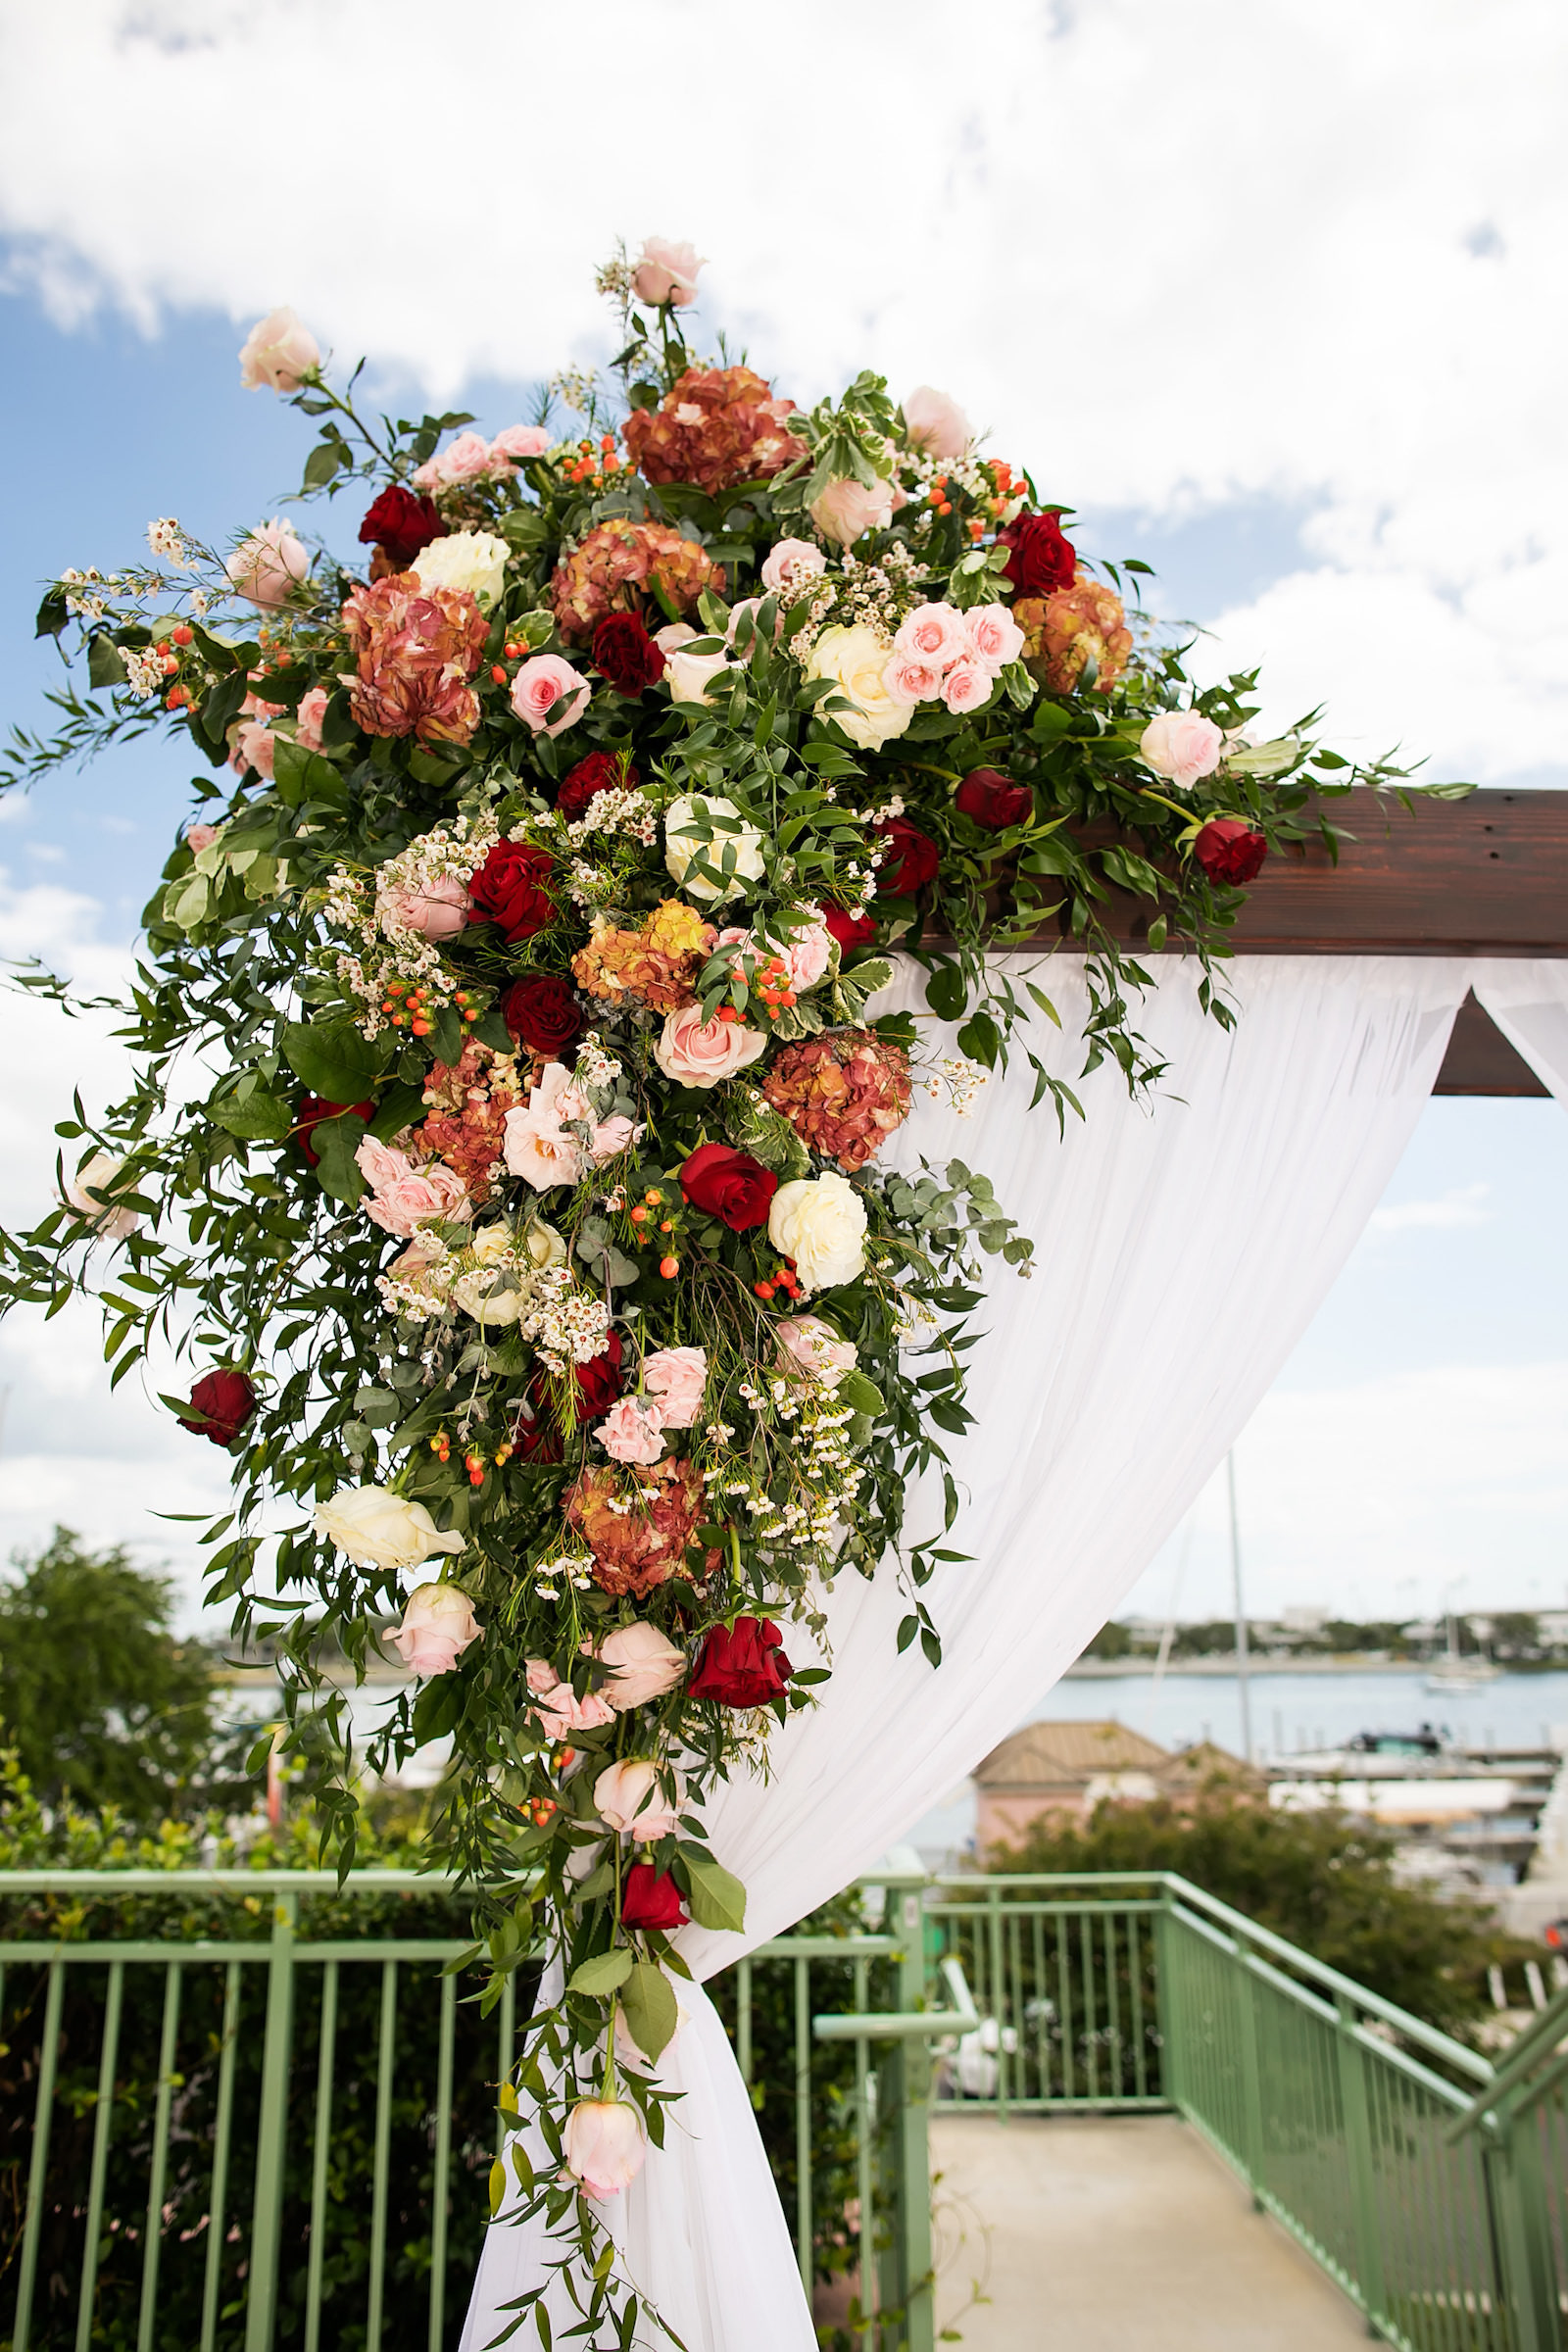 Elegant Garden Wedding Ceremony Decor, Wooden Arch with Lush Burgundy and Pink Floral Arrangements and White Linen Draping | Tampa Bay Wedding Photographer Limelight Photography | Planner Breezin Weddings | Florist Lemon Drops | Rentals Outside the Box Event Rentals